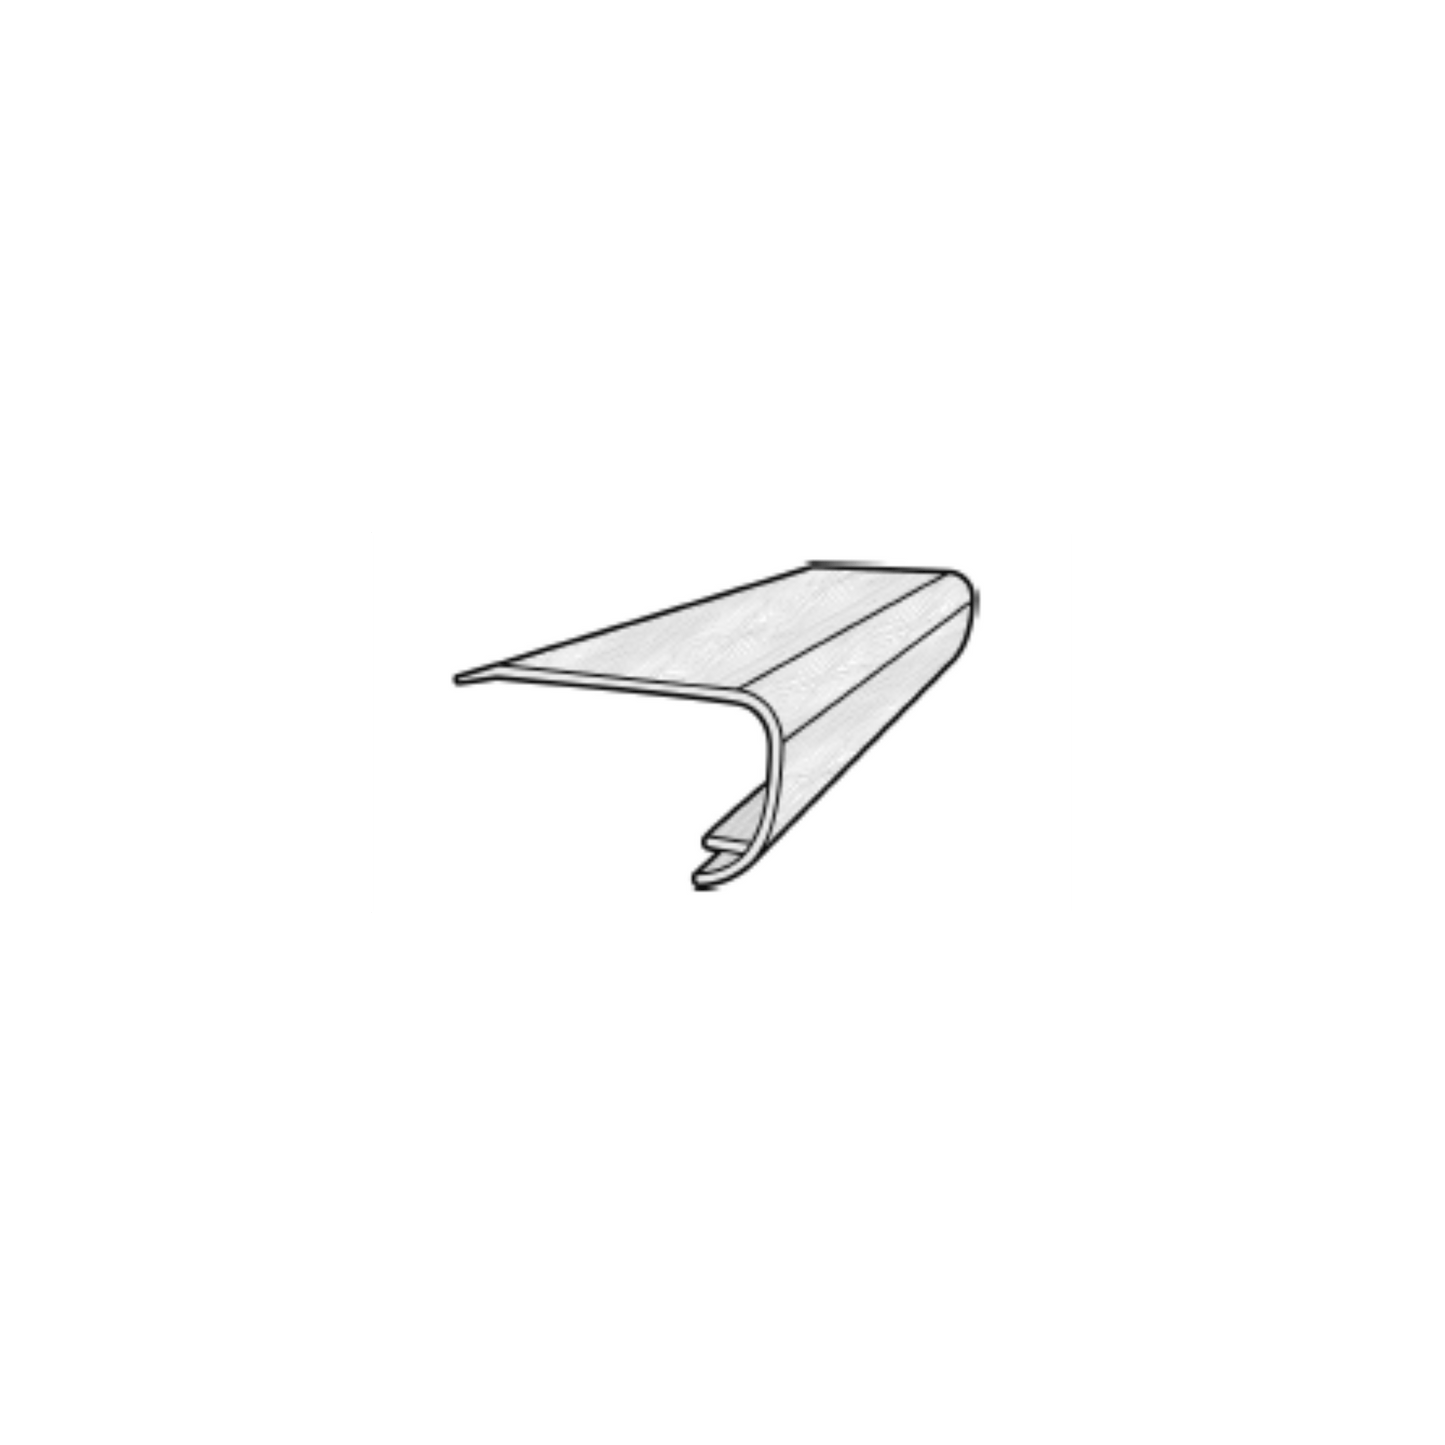 Accessory MSI - Cyrus - Hawthorne - Overlap Stair Nose MSI